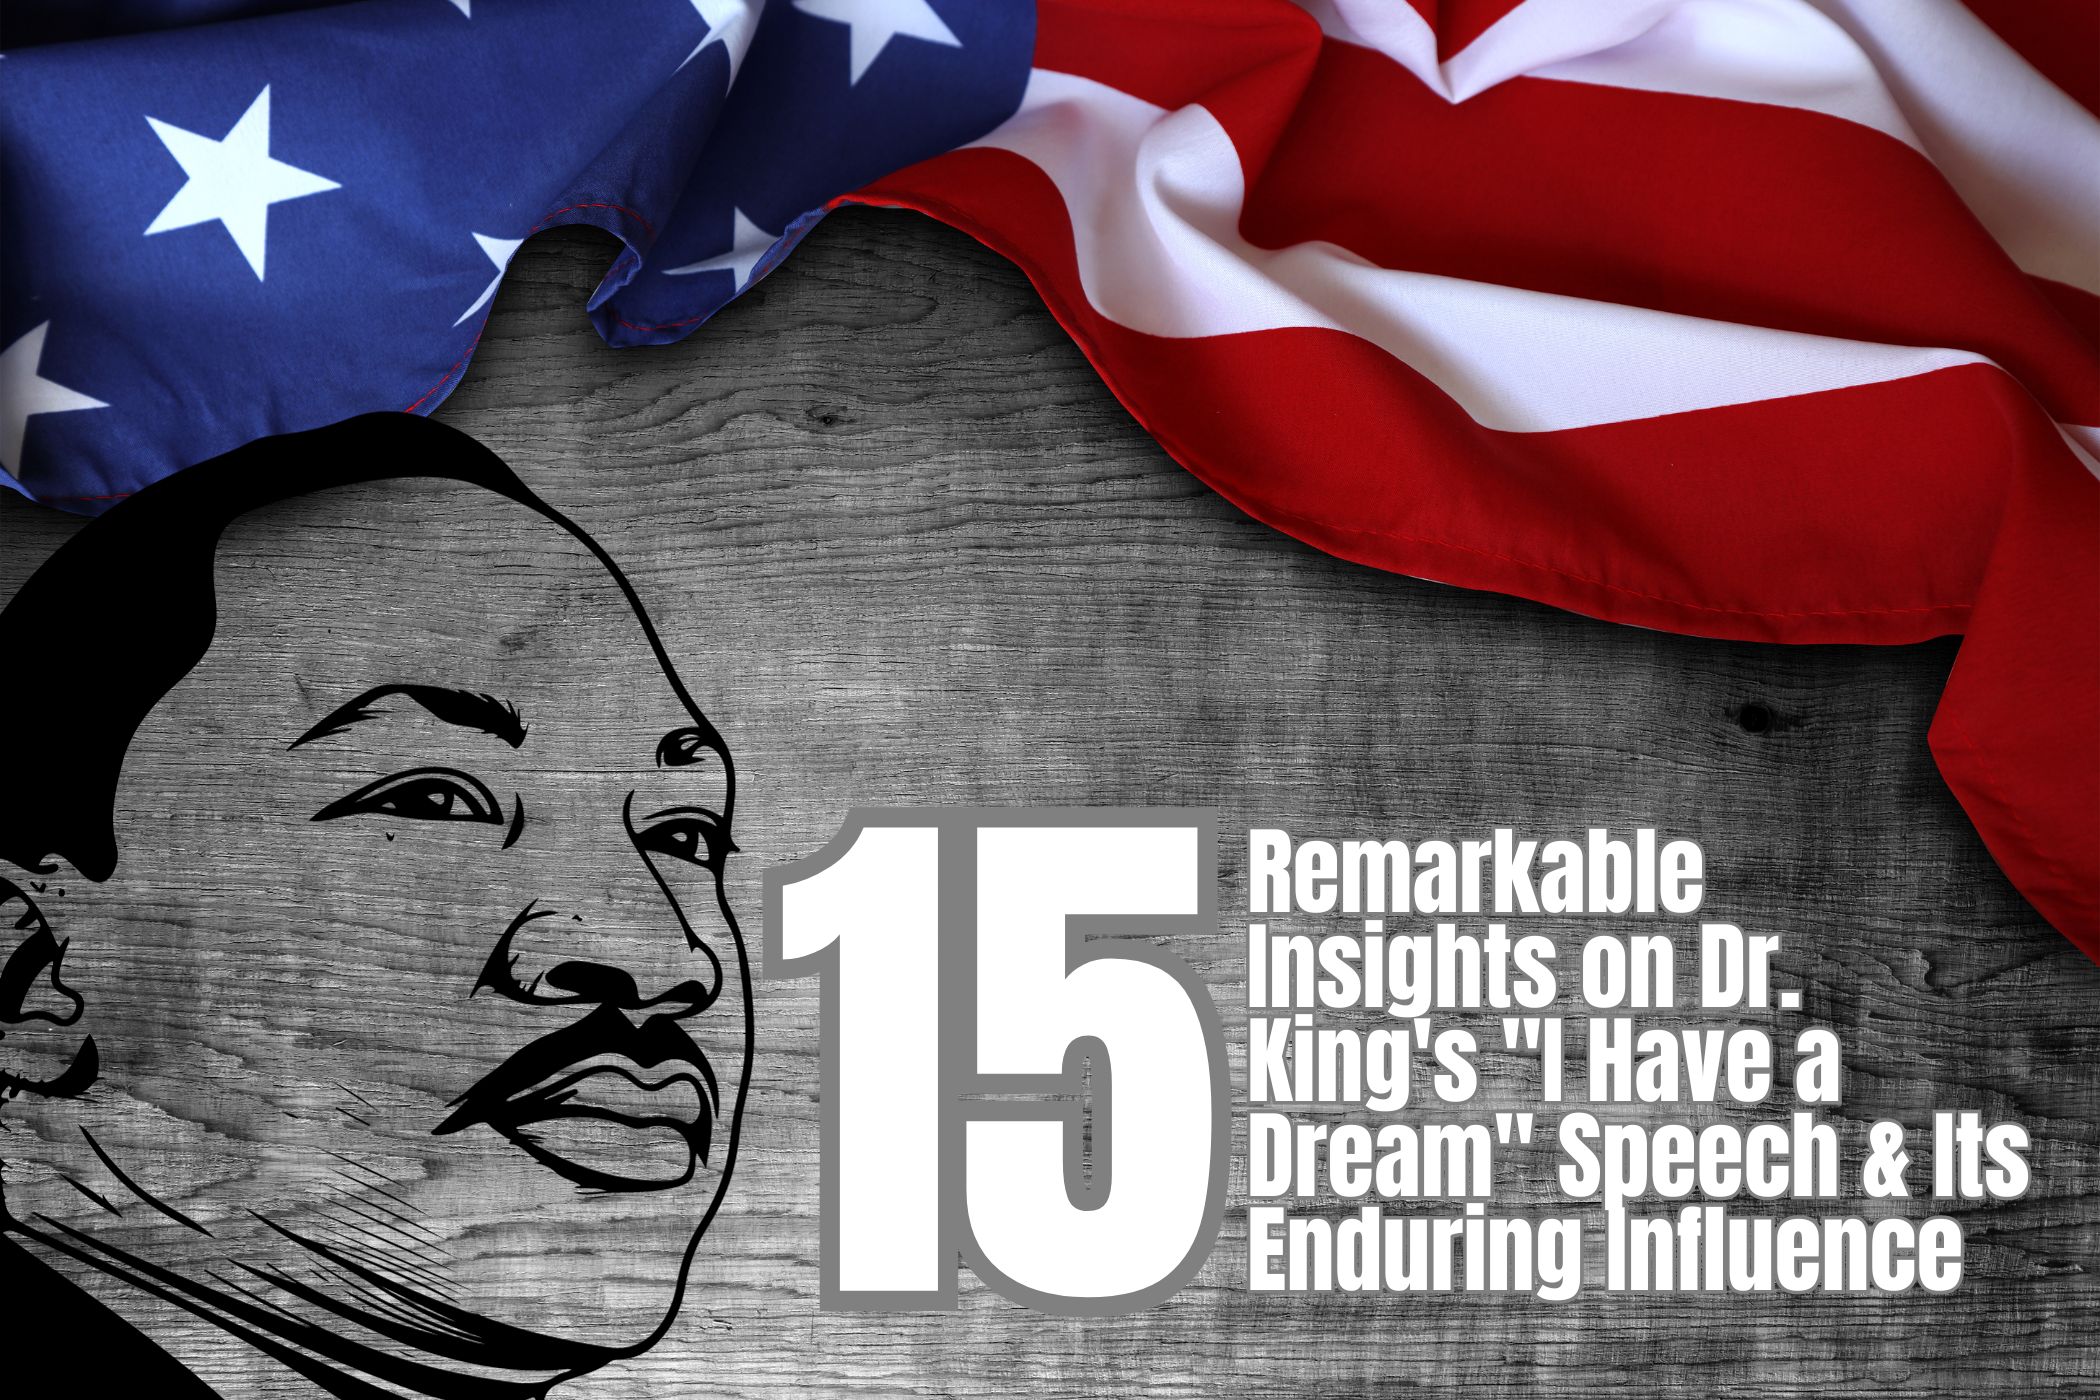 image-of-martin-luther-king-US-flag-blog-title-15-Remarkable-Insights-on-Dr.-Kings-I-Have-a-Dream-Speech-and-Its-Enduring-Influence